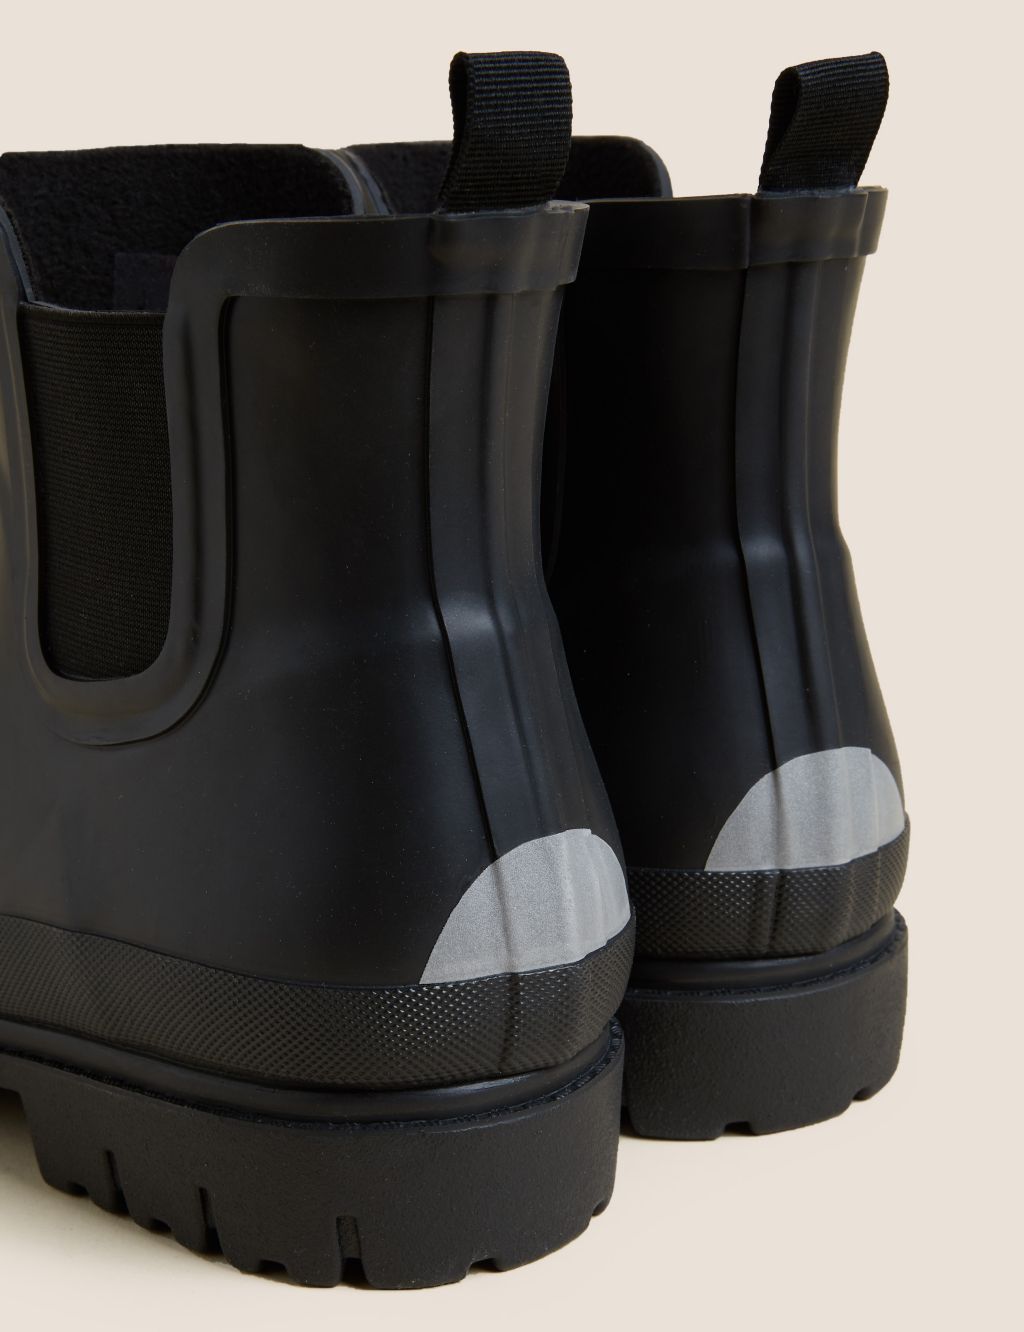 Waterproof Pull-On Chelsea Boots image 3